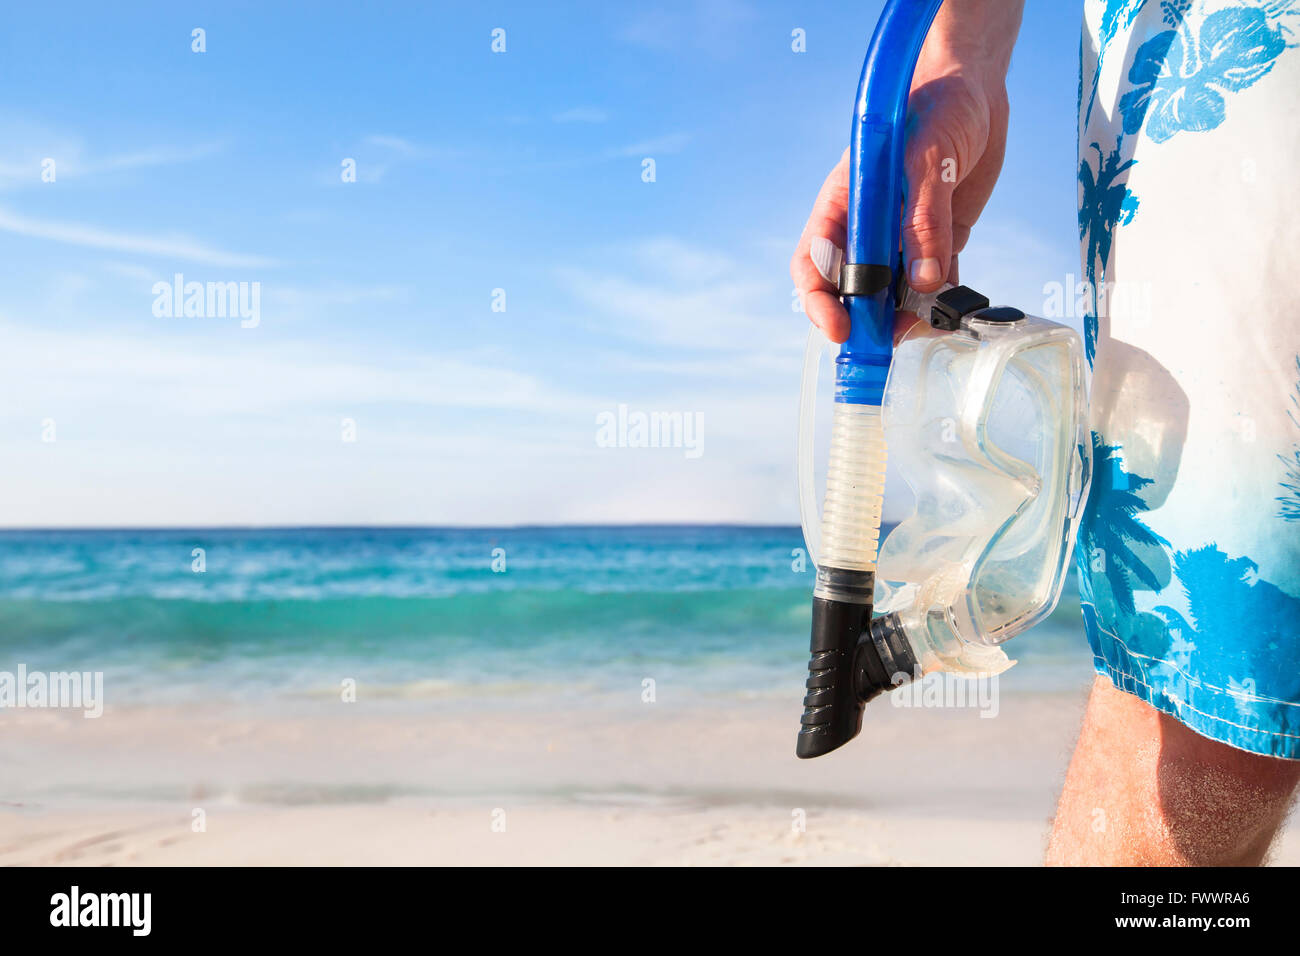 snorkeling background, hand holding mask and snorkel on the beach, active tourism Stock Photo